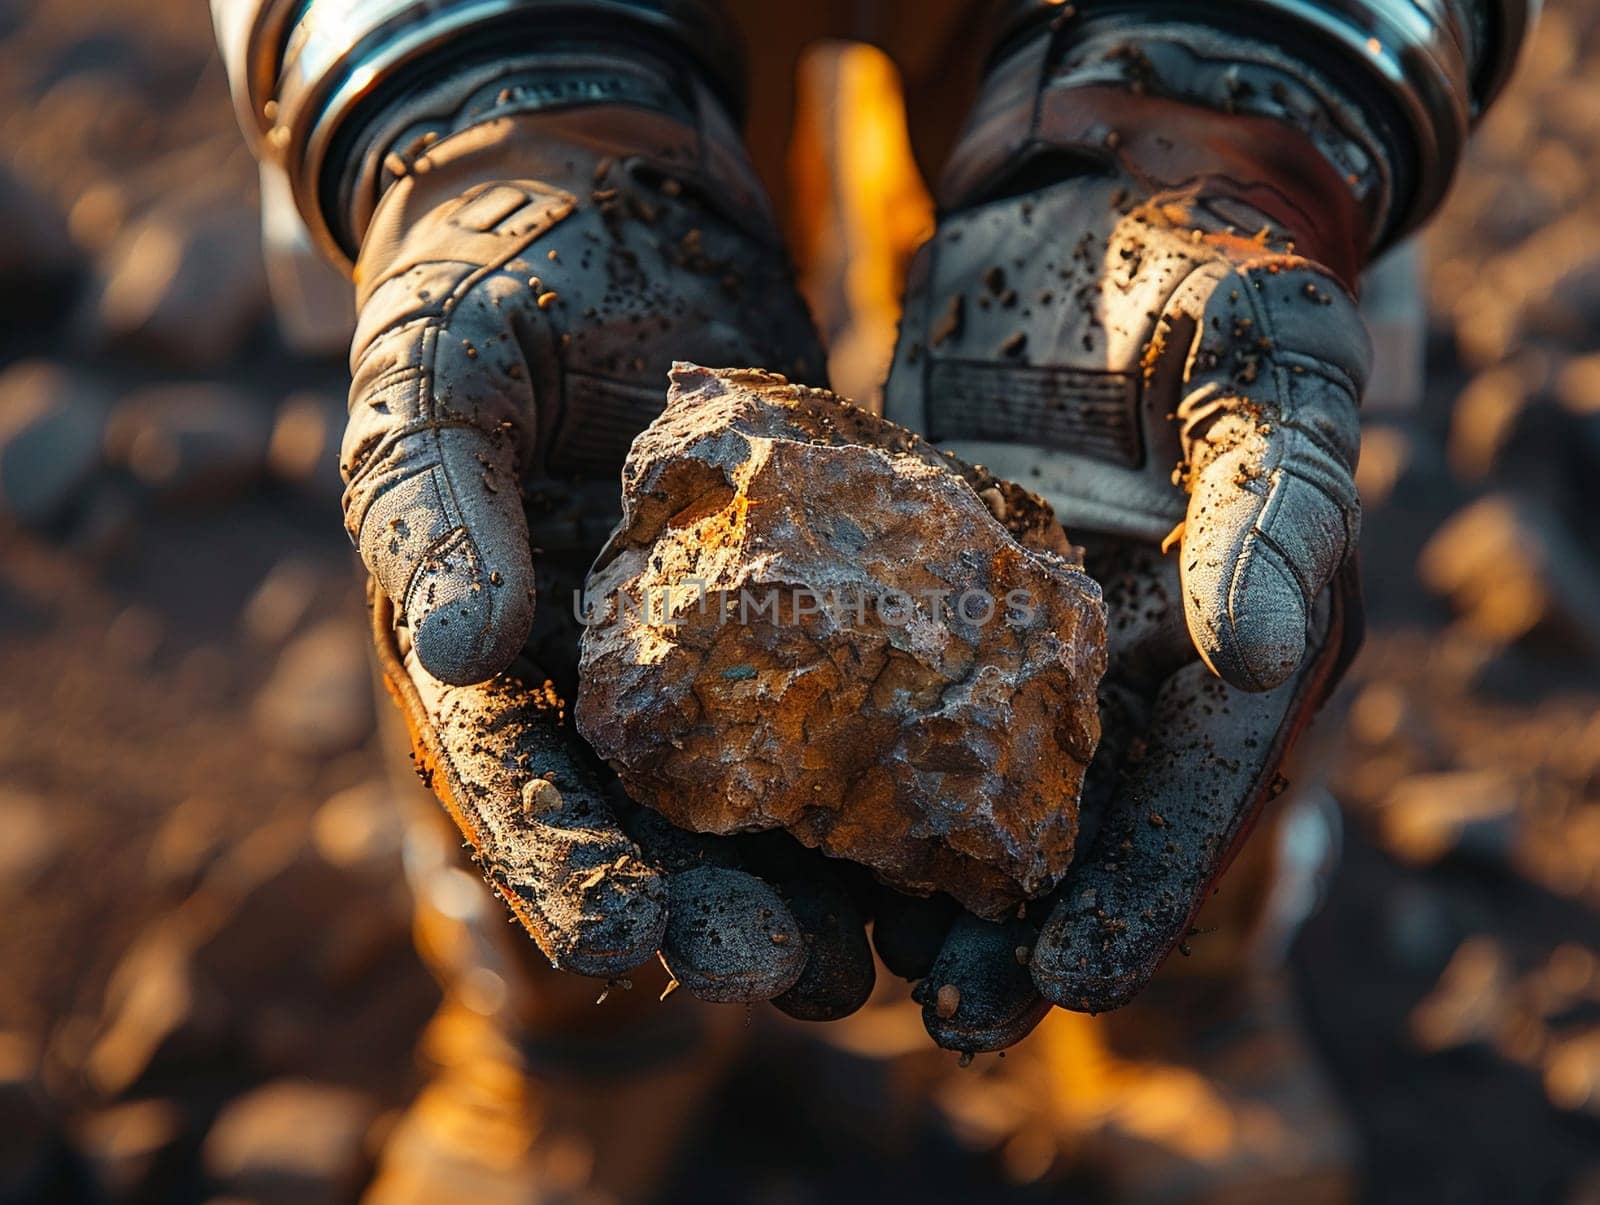 Astronaut's hands holding a martian rock, rendered in a photorealistic style against the backdrop of space.